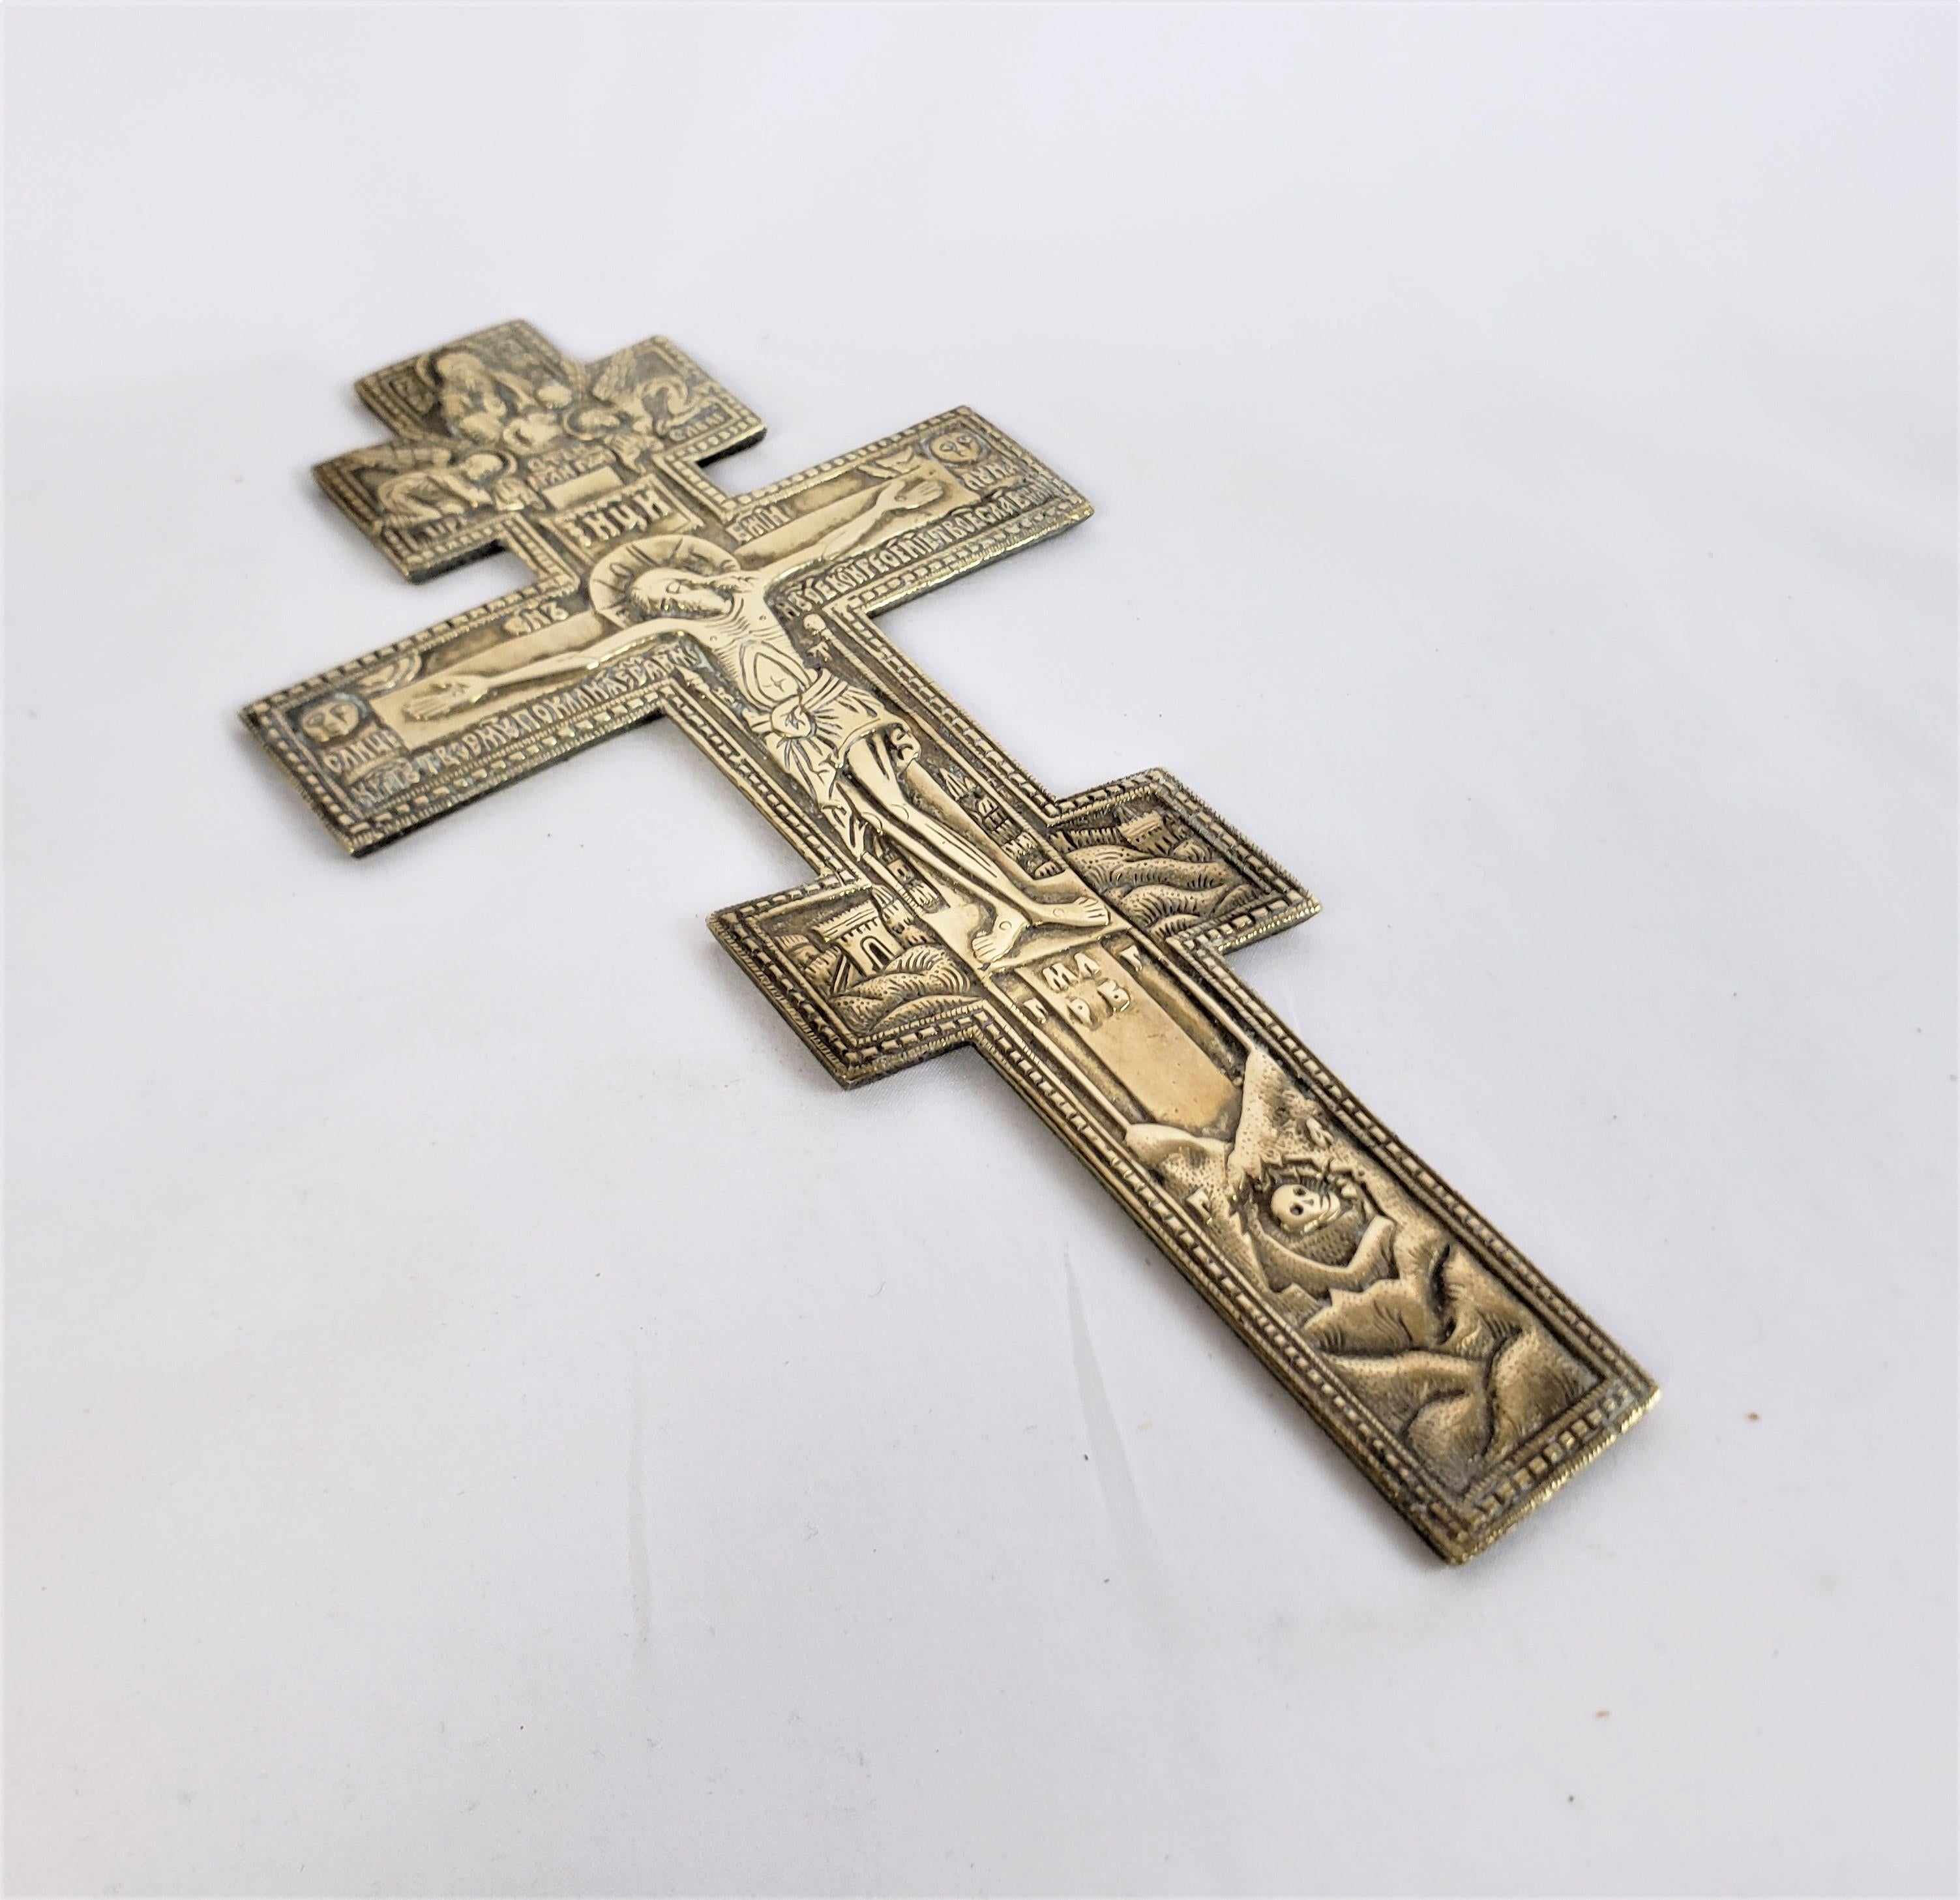 This antique crucifix is unsigned, and dates to approximately 1880 and done in the classical Imperialist style. The crucifix is composed of cast and patinated bronze and depicts Jesus on the cross with angels at the top and various symbolism